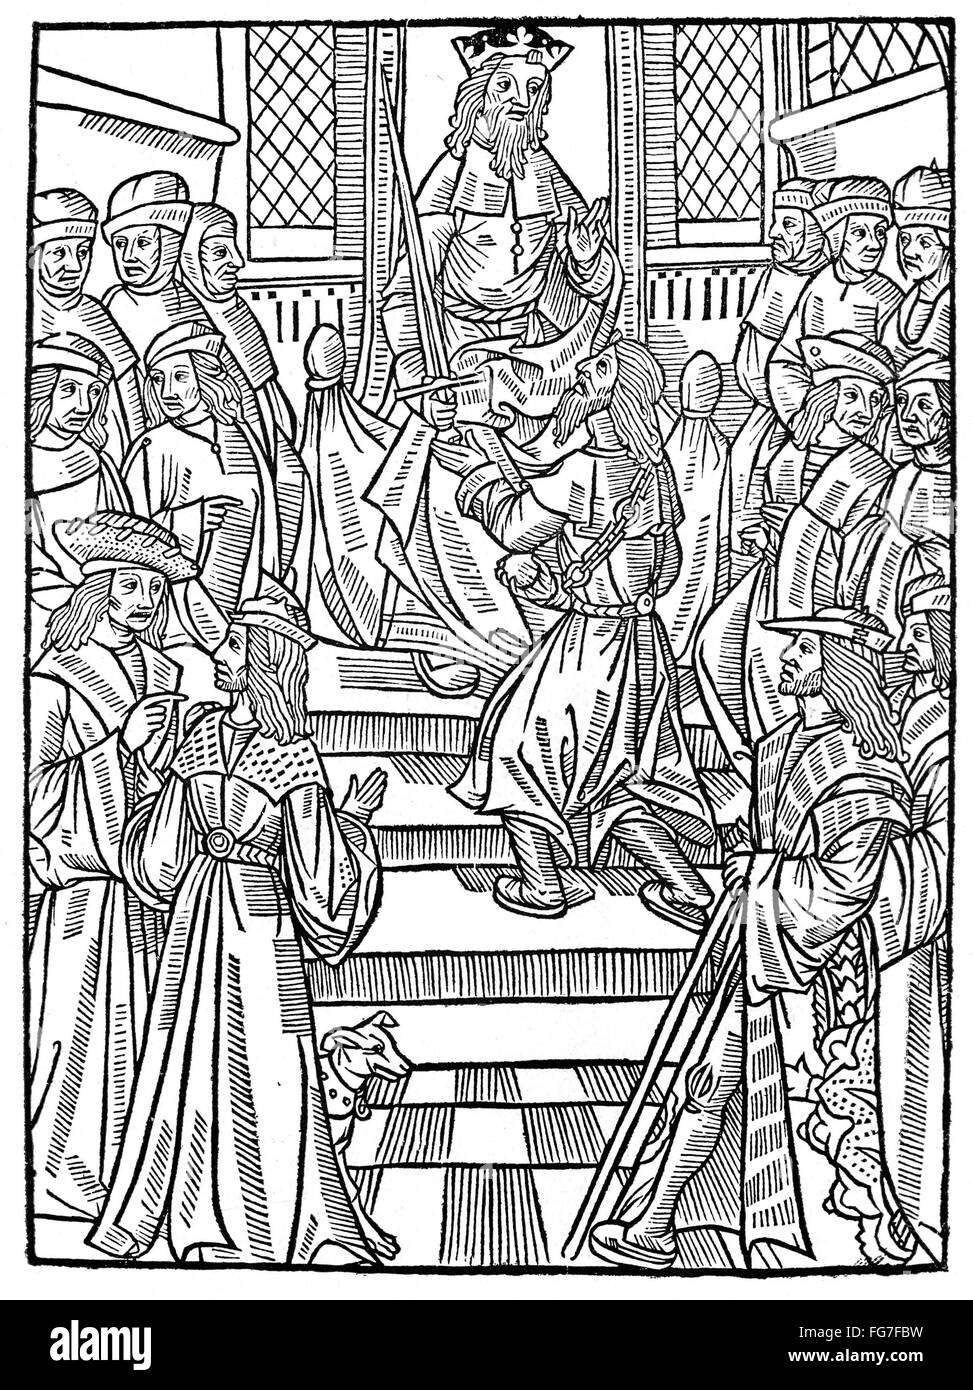 KING PERCEFOREST. /nPerceforest, a follower of Alexander the Great, and Greek ancestor of King Arthur. Woodcut from 'History of King Perceforest, of Great Britian,' published in Paris by Gilles de Gourmont, 1531-2. Stock Photo